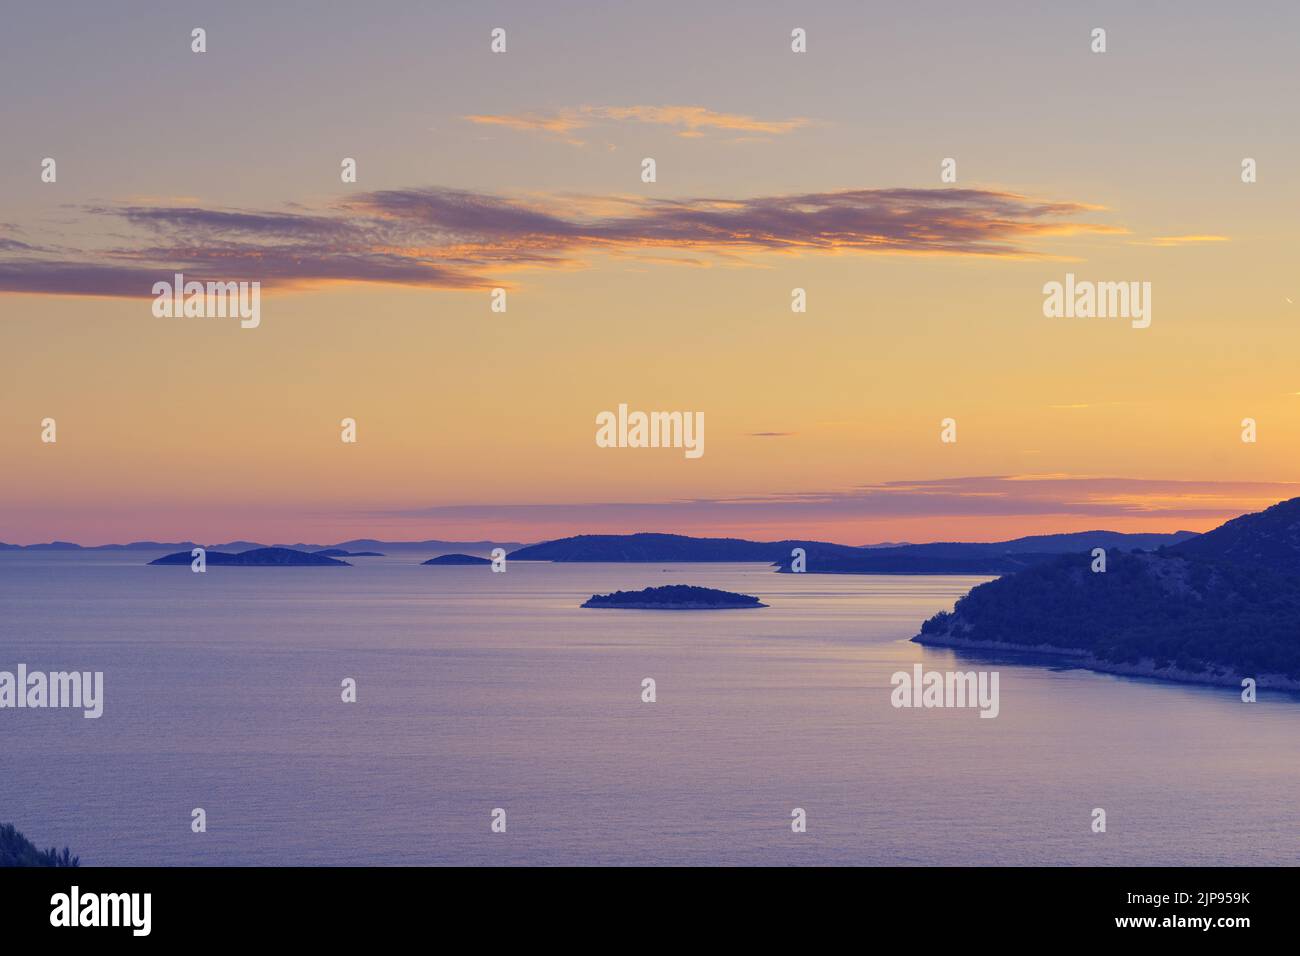 Islands of Kornati national park, aerial view of Adriatic archipelago after sunset. Tourism, travel destinations and environment concepts Stock Photo